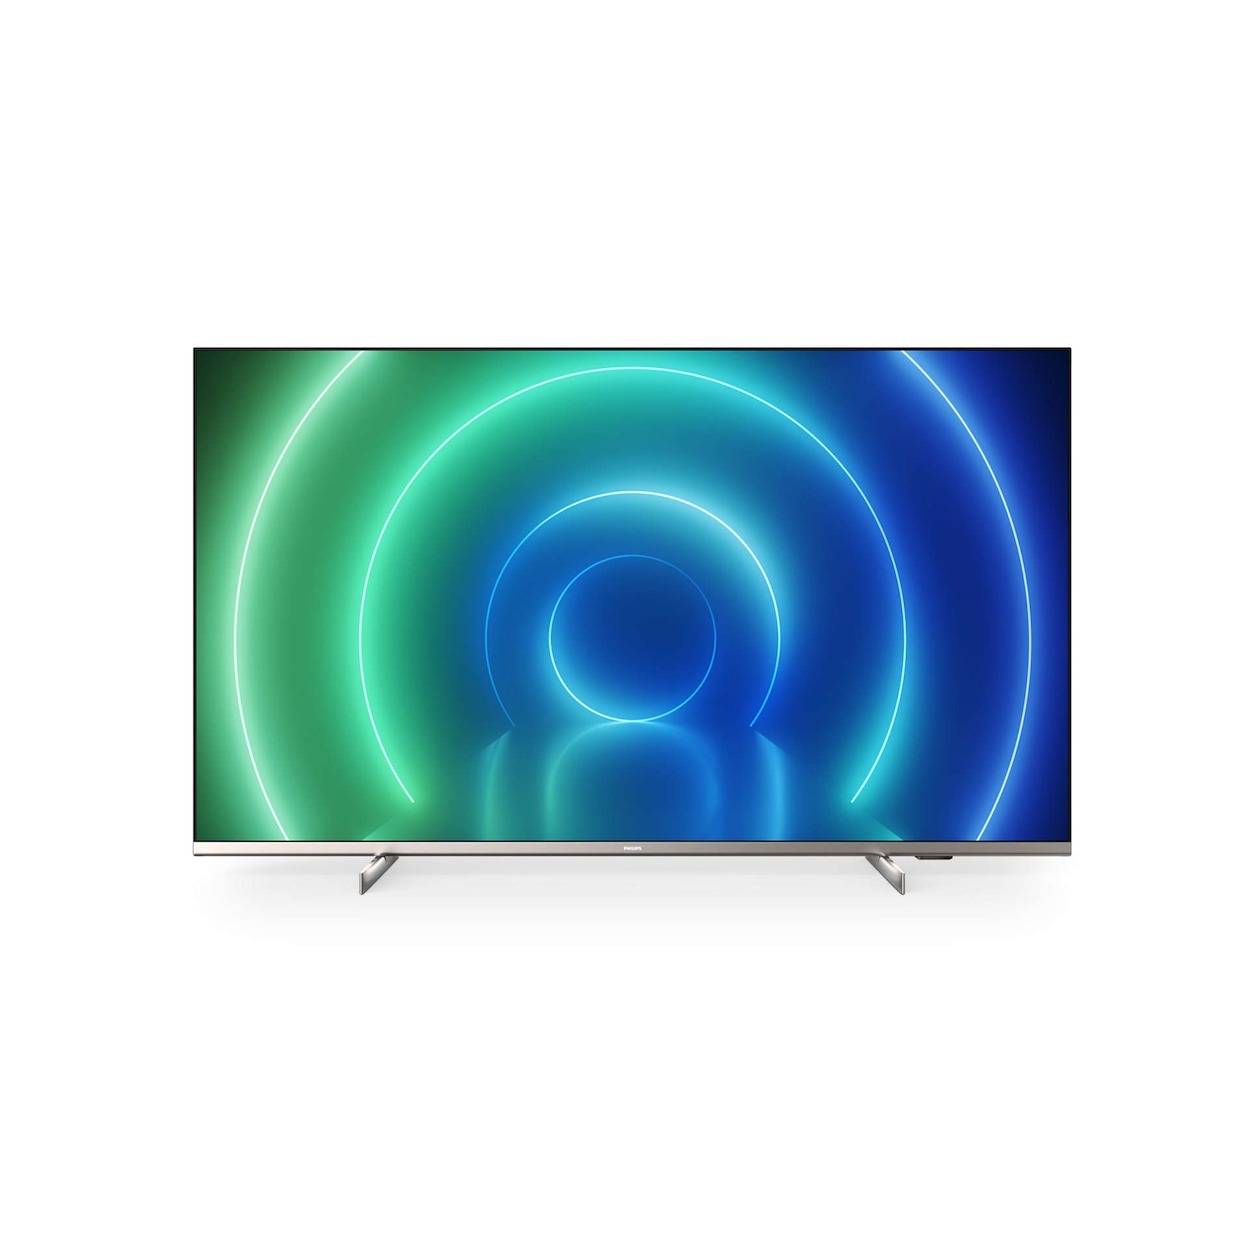 Philips 50pus7556 Uhd 4k Led Tv 50(126cm) Smart Tv Dolby Vision/Dolby Atmos Geluid 3 X Hdmi(2 X Hdmi Vrr ) online kopen